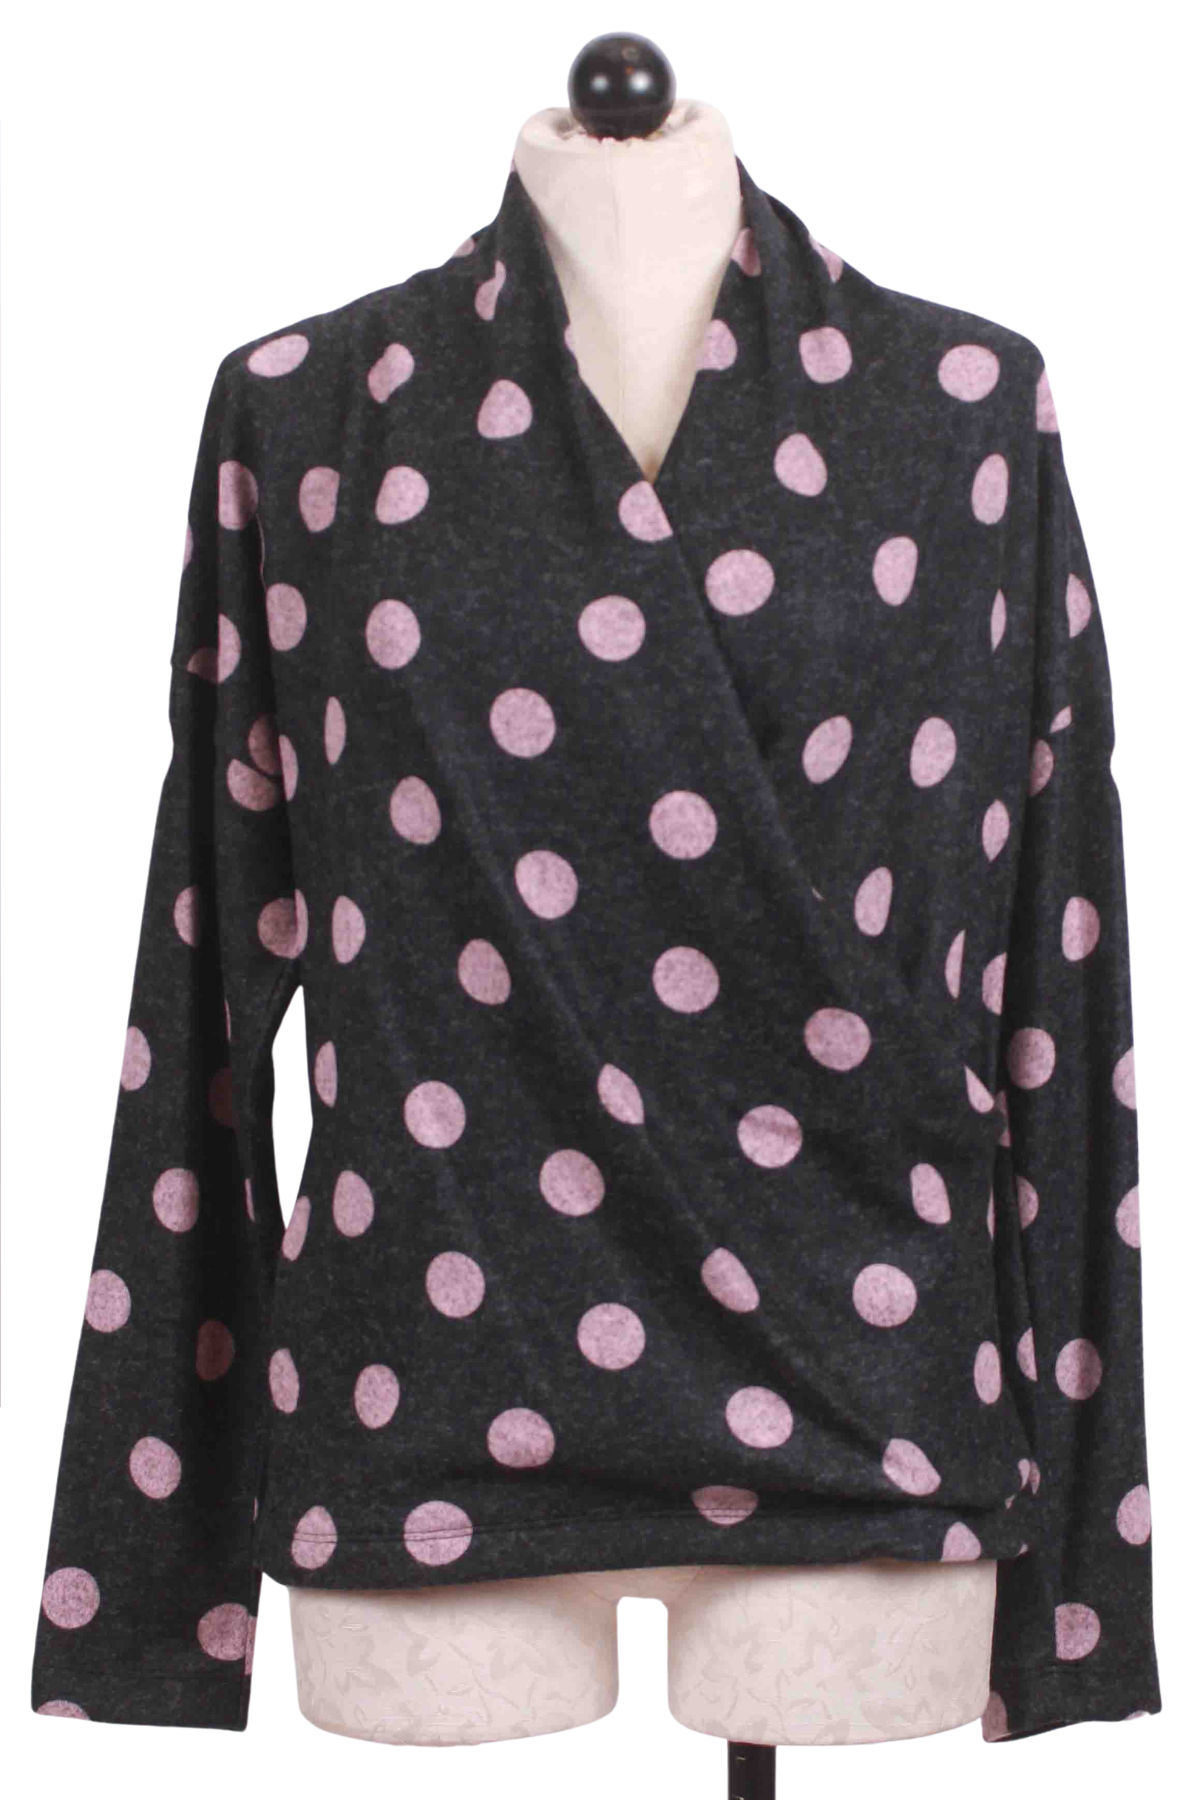 Rose Blossom Polka Dot Front Overlay Top by Nally and Millie